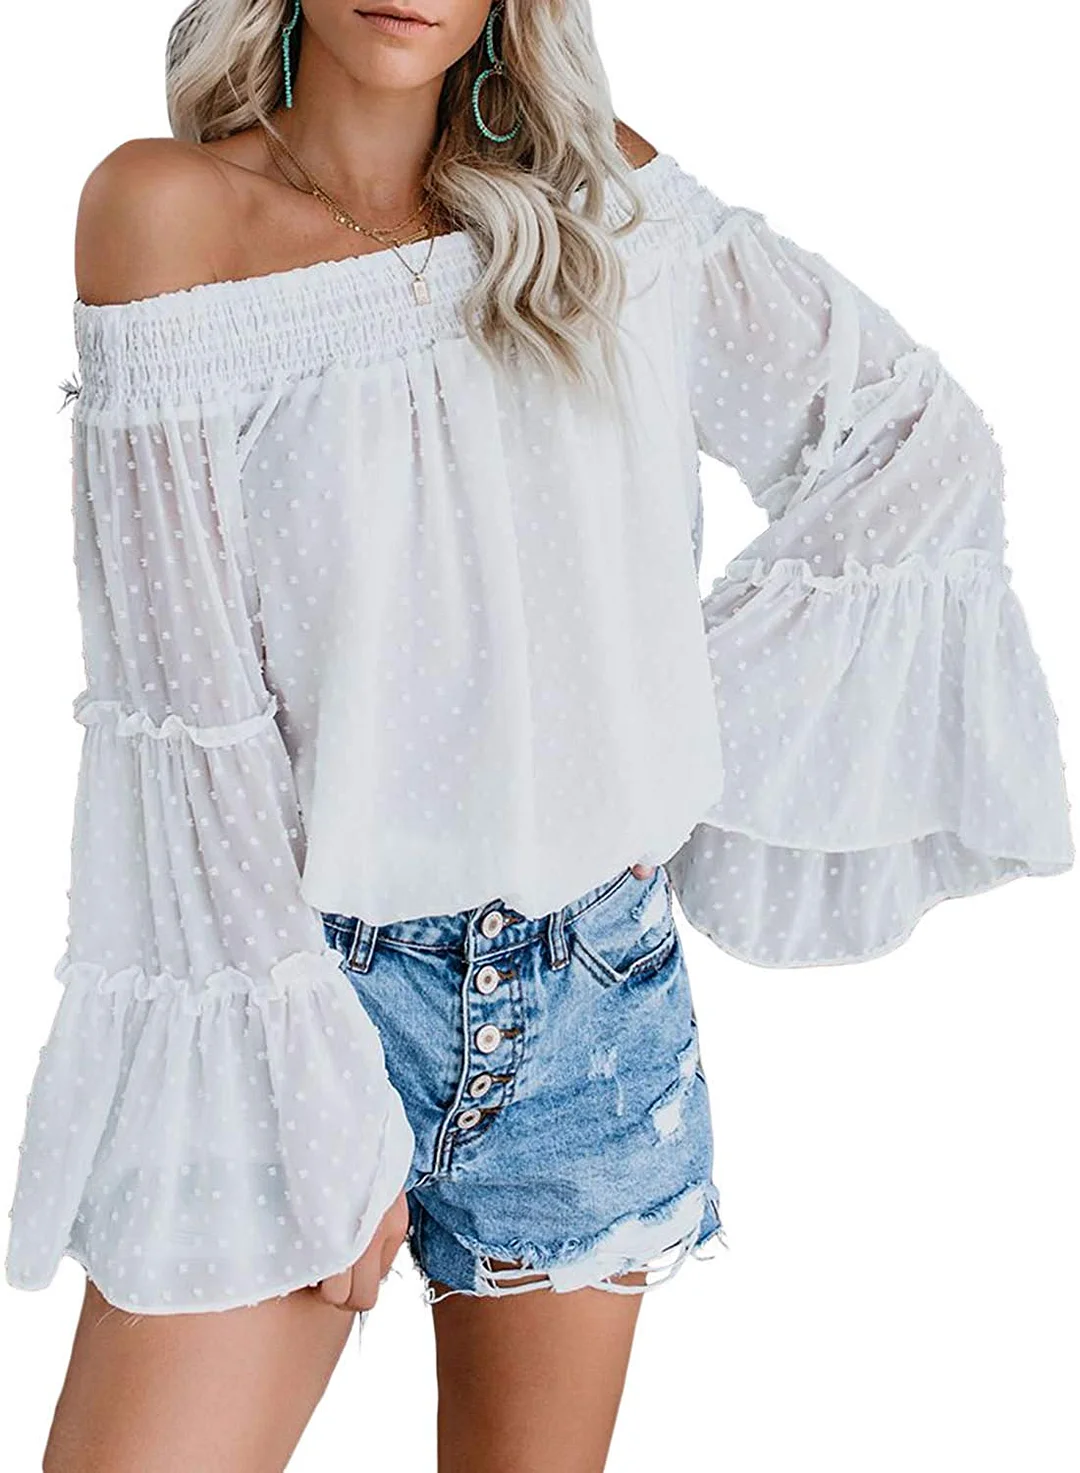 Womens Dot Printed Off The Shoulder Flared Bell Sleeve Tops Casual Loose Chiffon Blouses T-Shirt